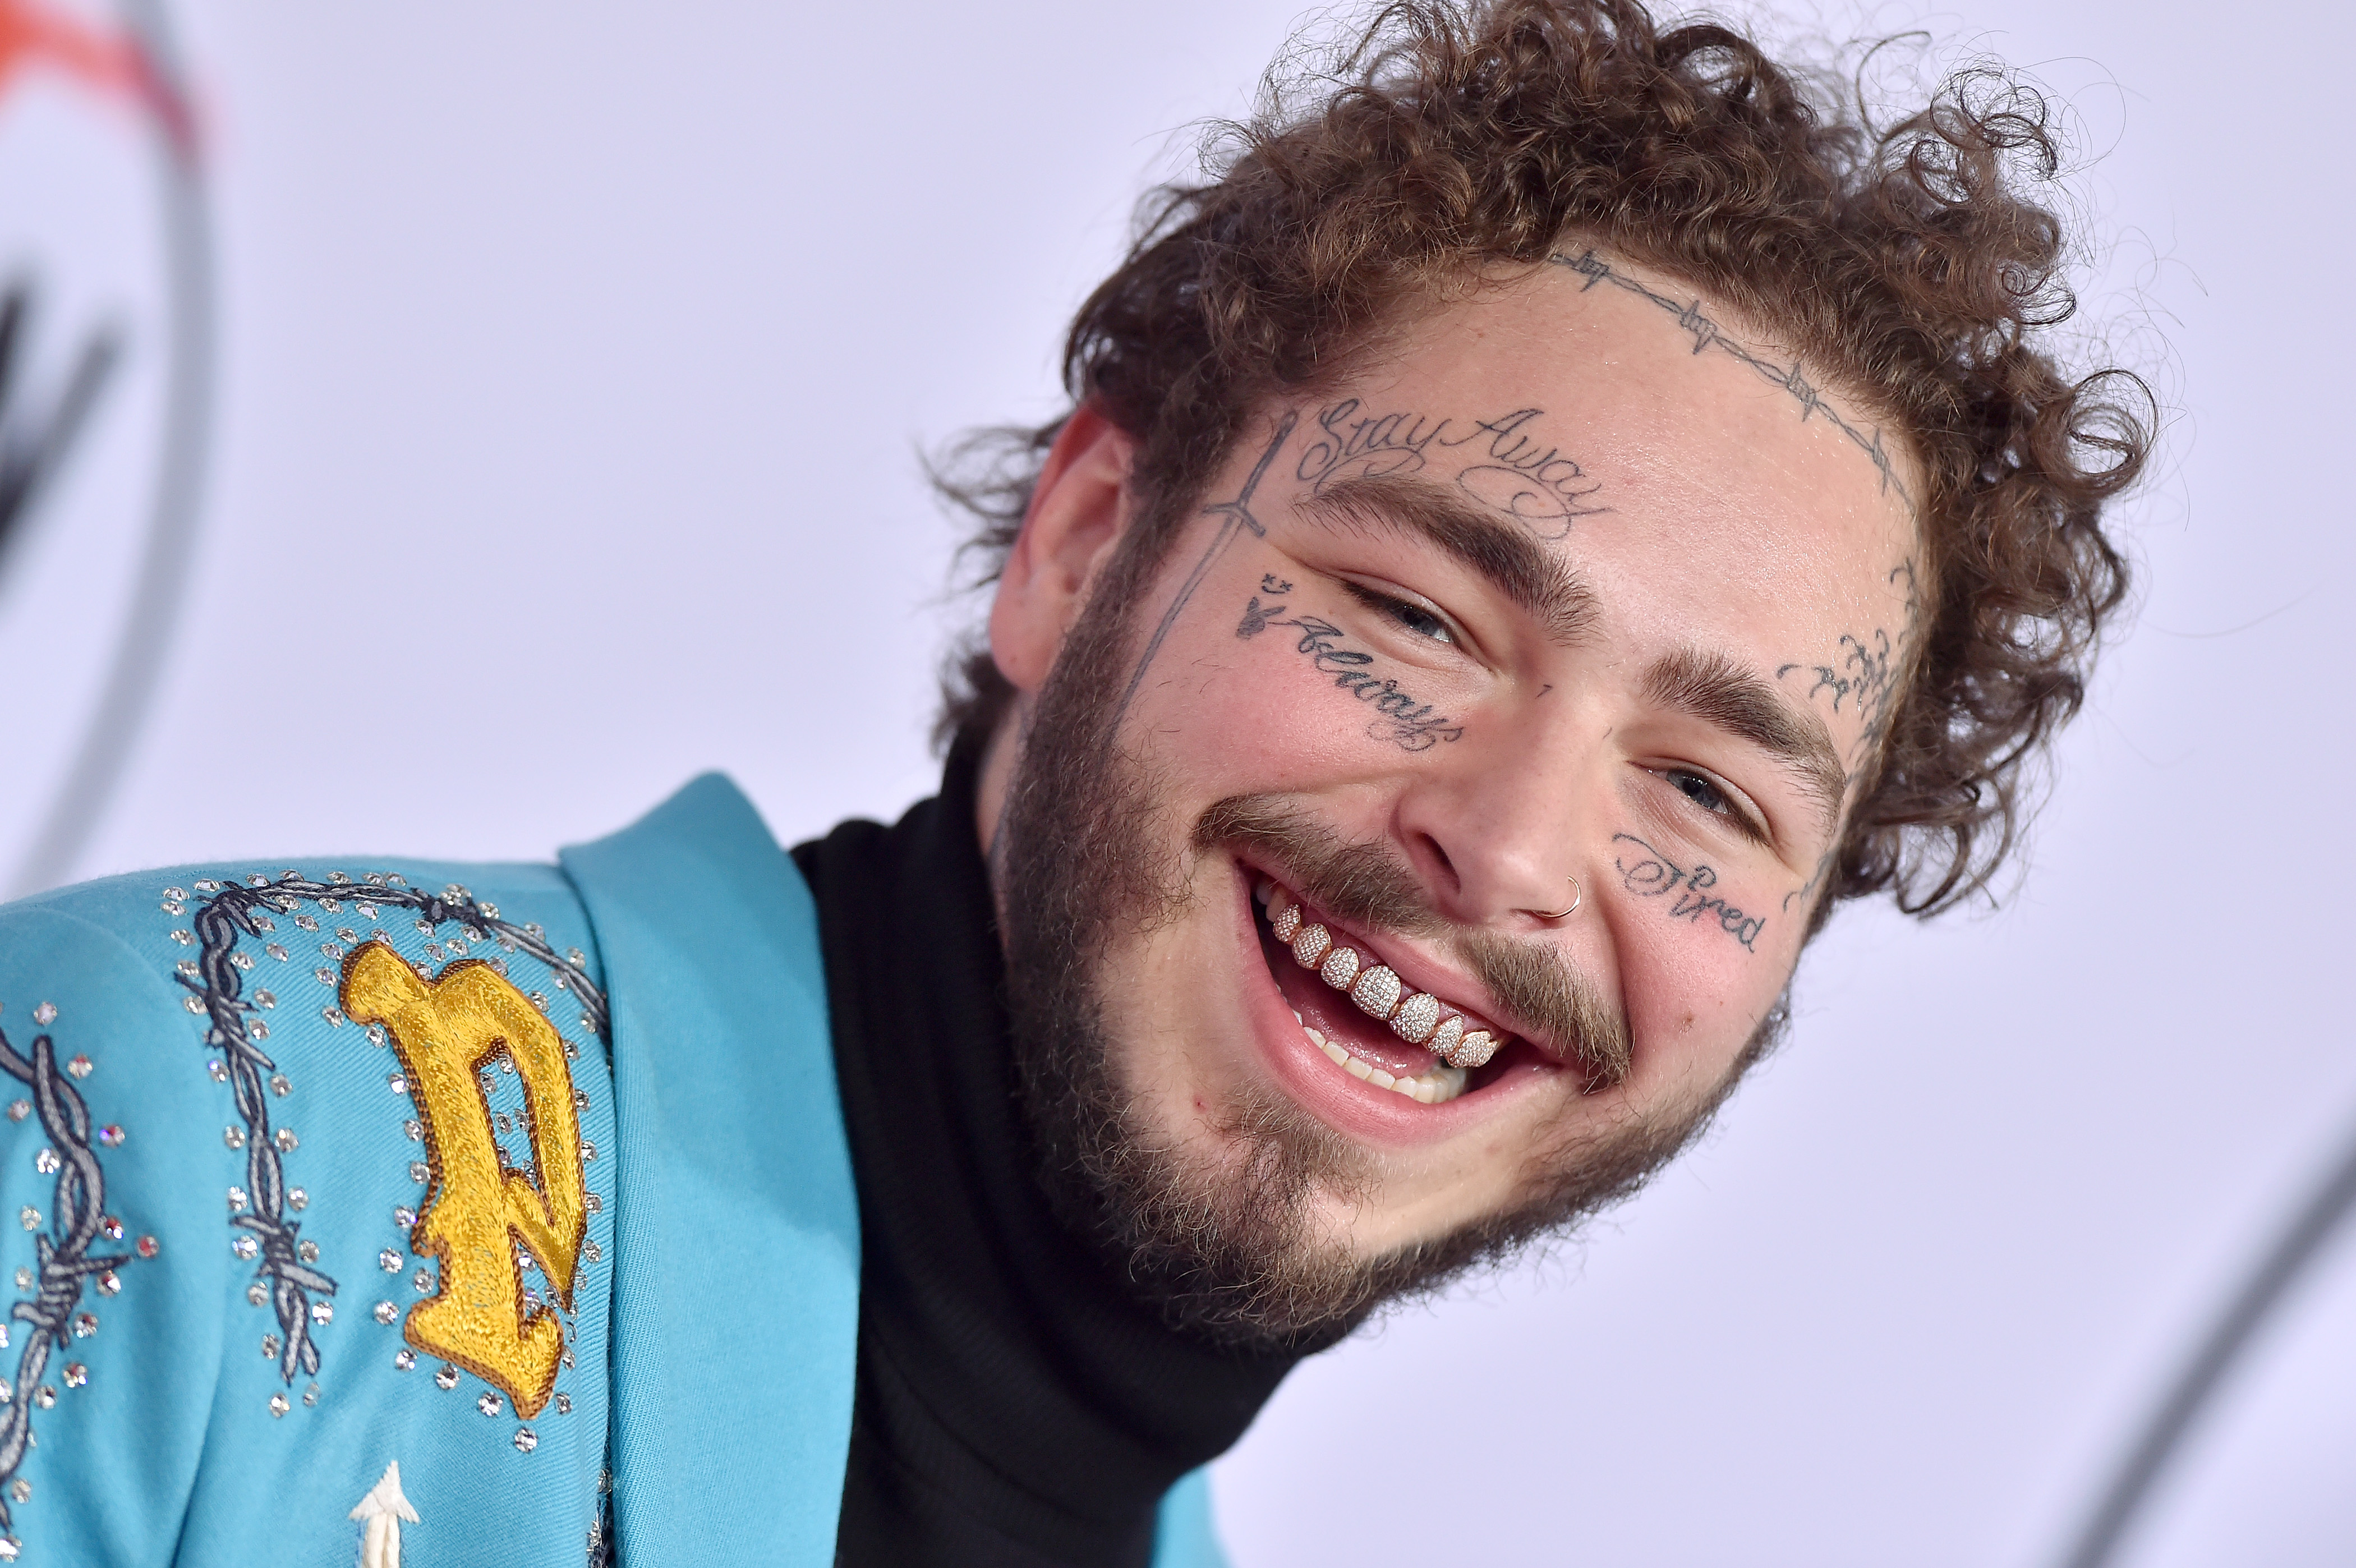 Post Malone attends the 2018 American Music Awards at Microsoft Theater on October 9, 2018, in Los Angeles, California. | Source: Getty Images